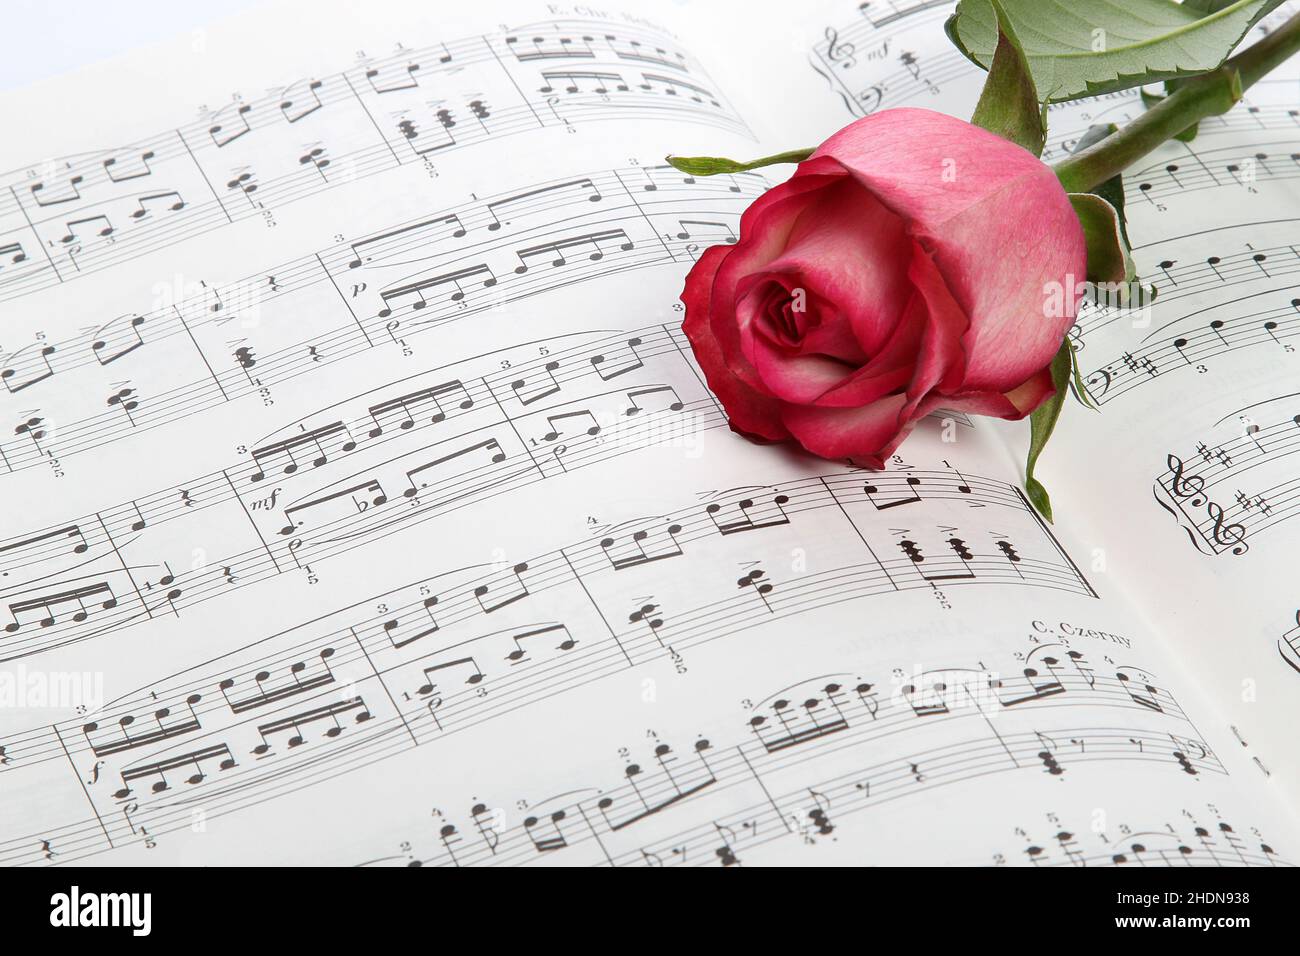 classical music, musical note, composition, notation, tablature, classical musics, musical notes, compositions, notations, tablatures Stock Photo